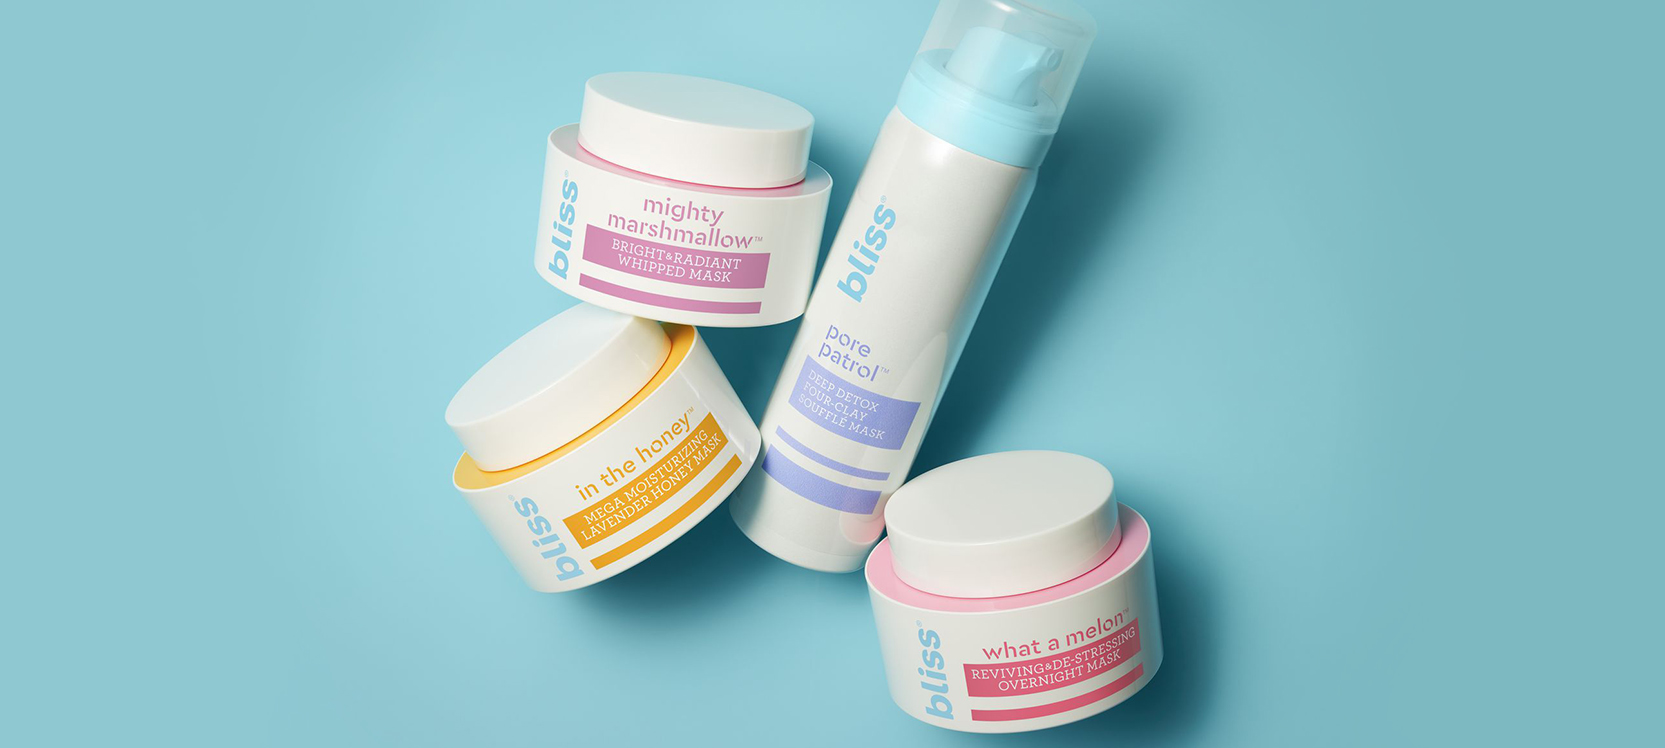 bliss skincare products